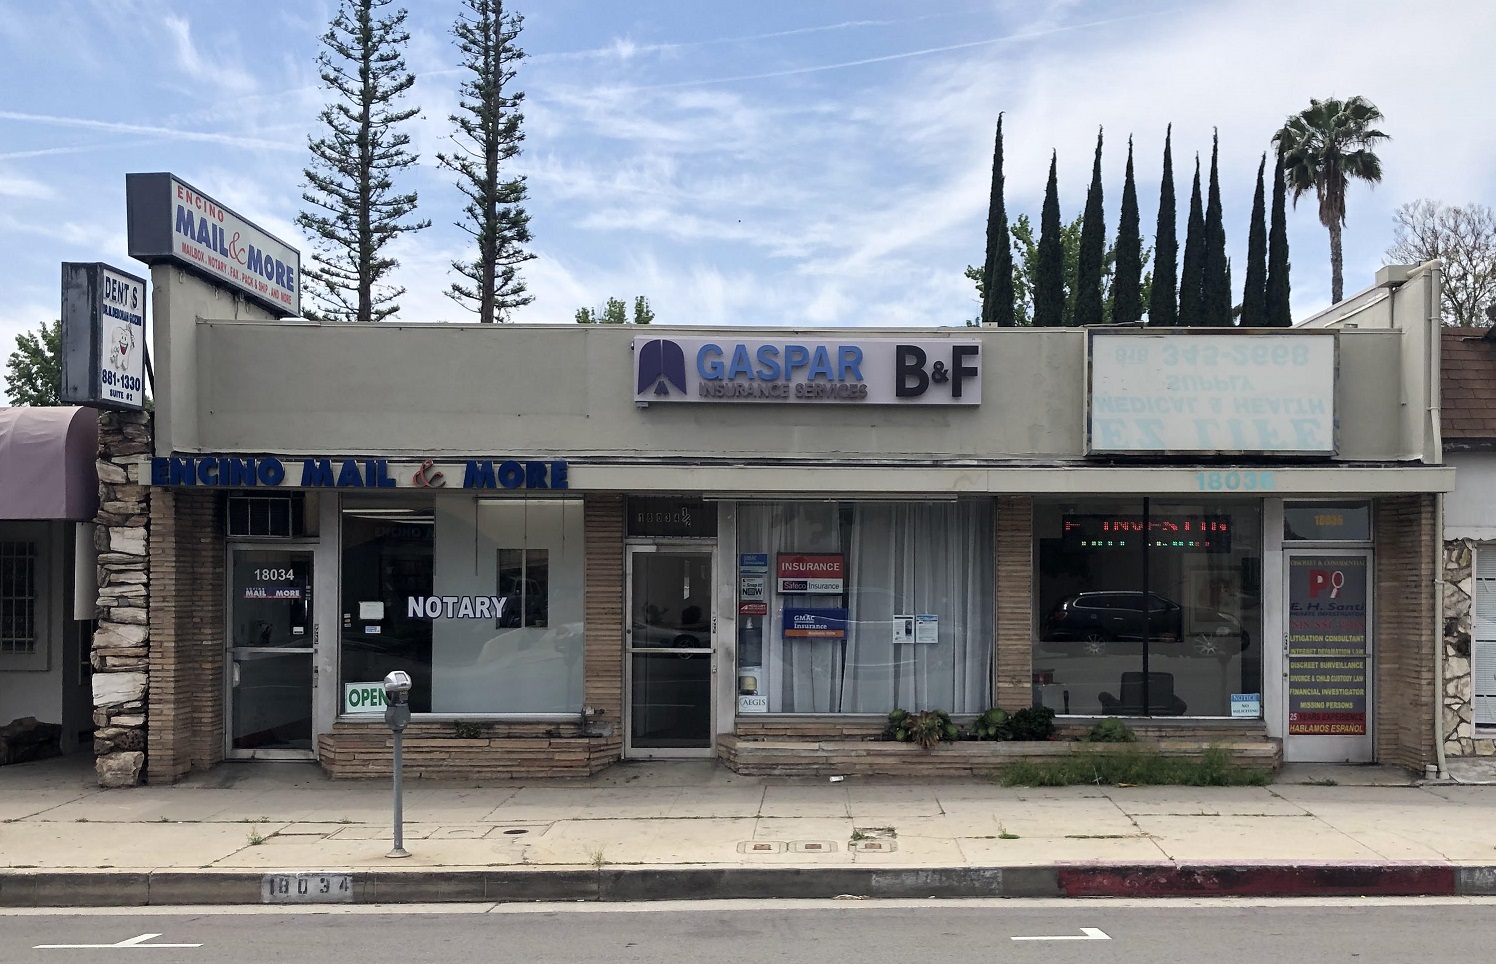 You are currently viewing Gaspar Insurance Services / B&F Storefront Sign in Woodland Hills